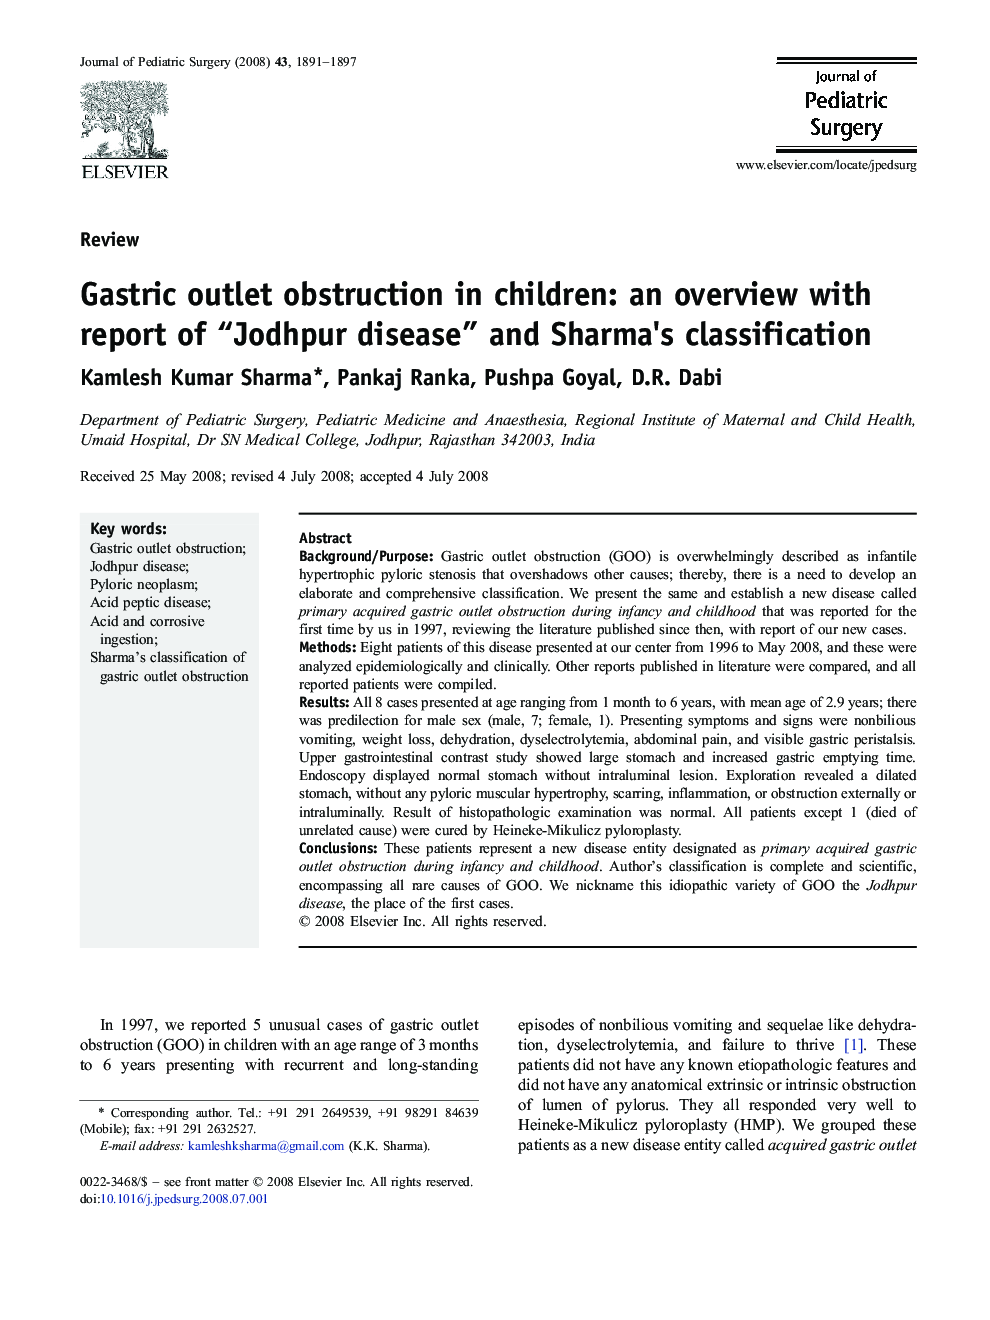 Gastric outlet obstruction in children: an overview with report of “Jodhpur disease” and Sharma's classification